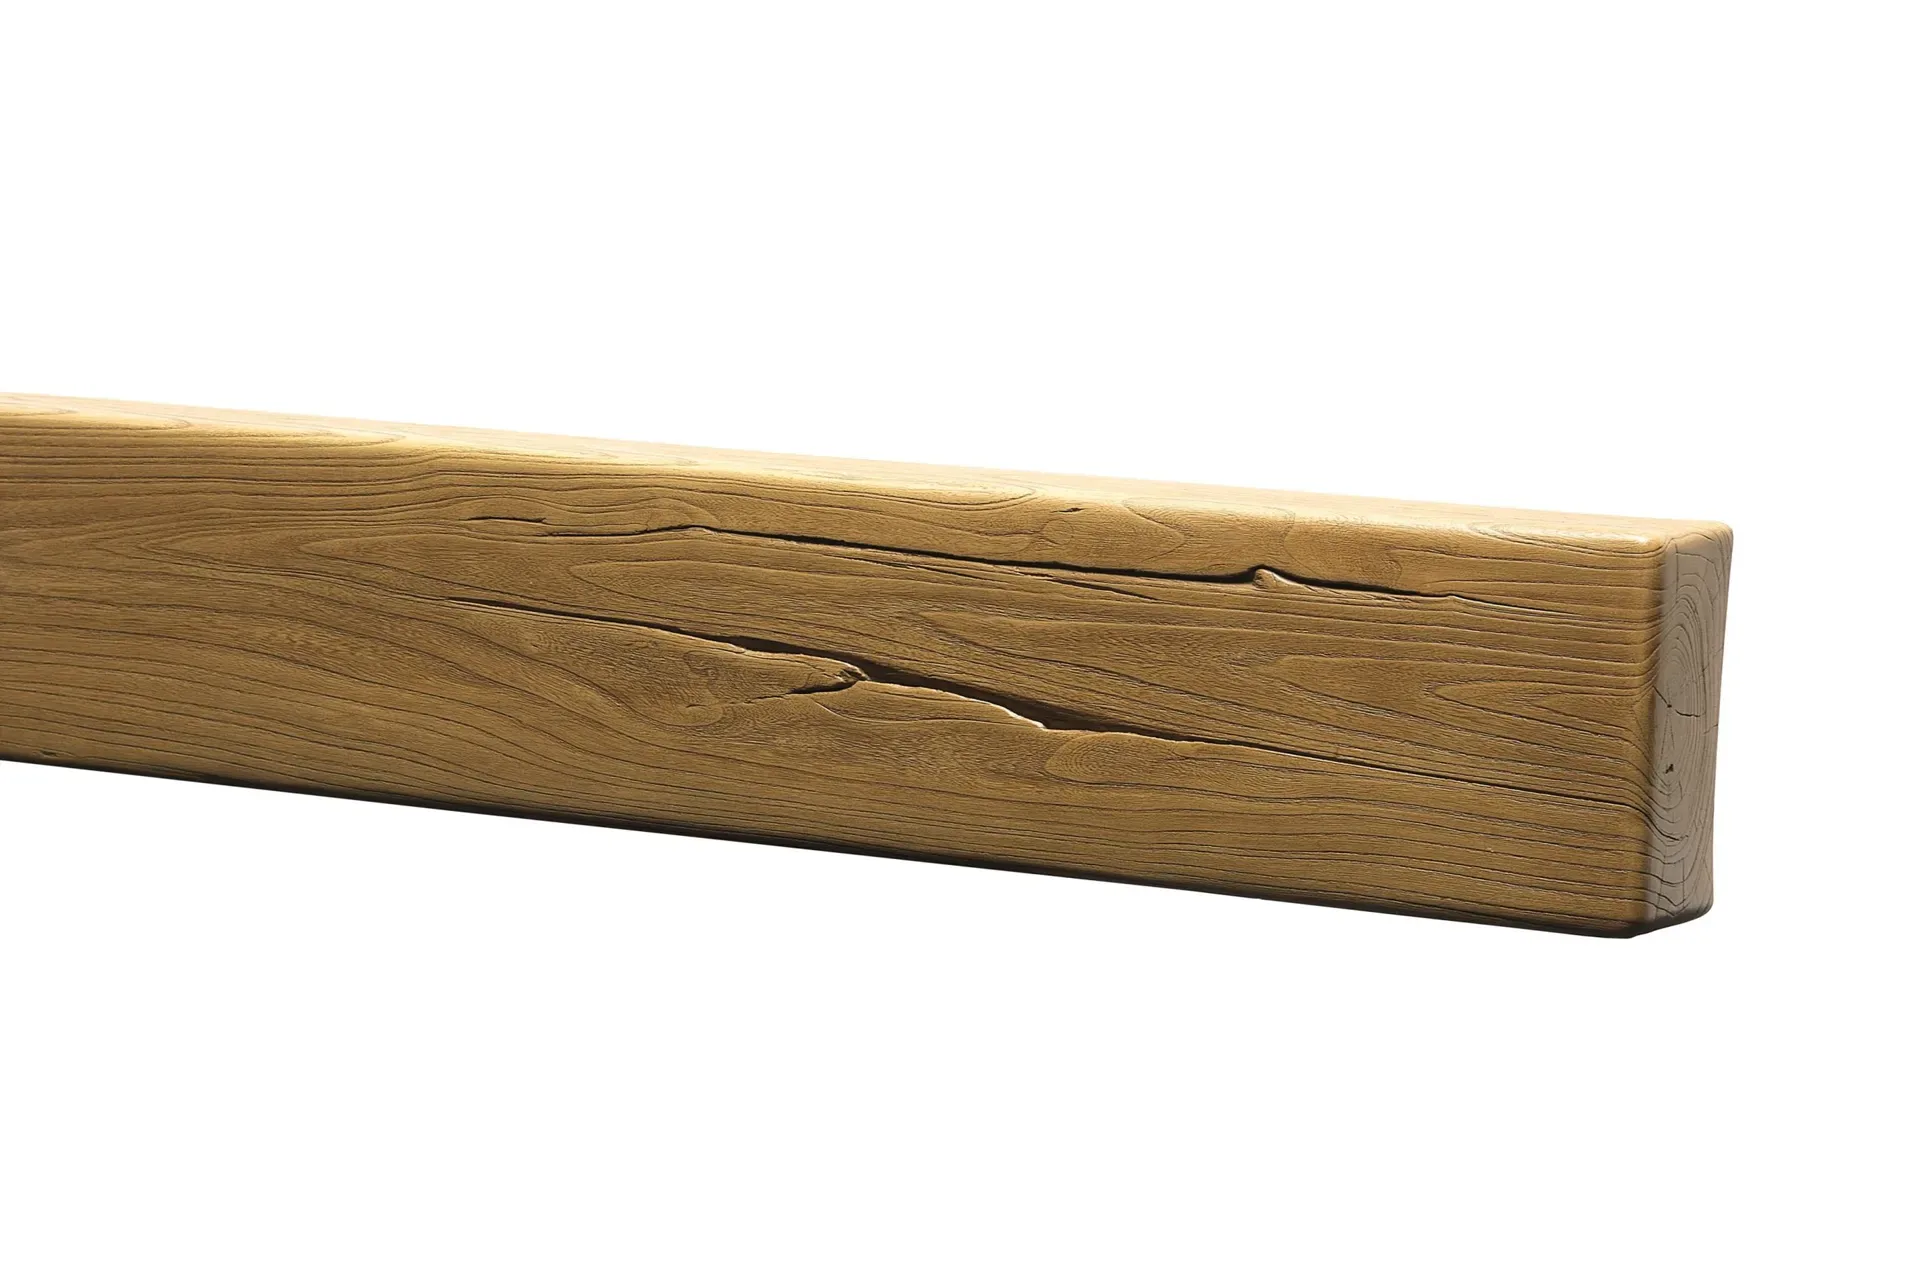 The gallery collection fireplace beam light oak